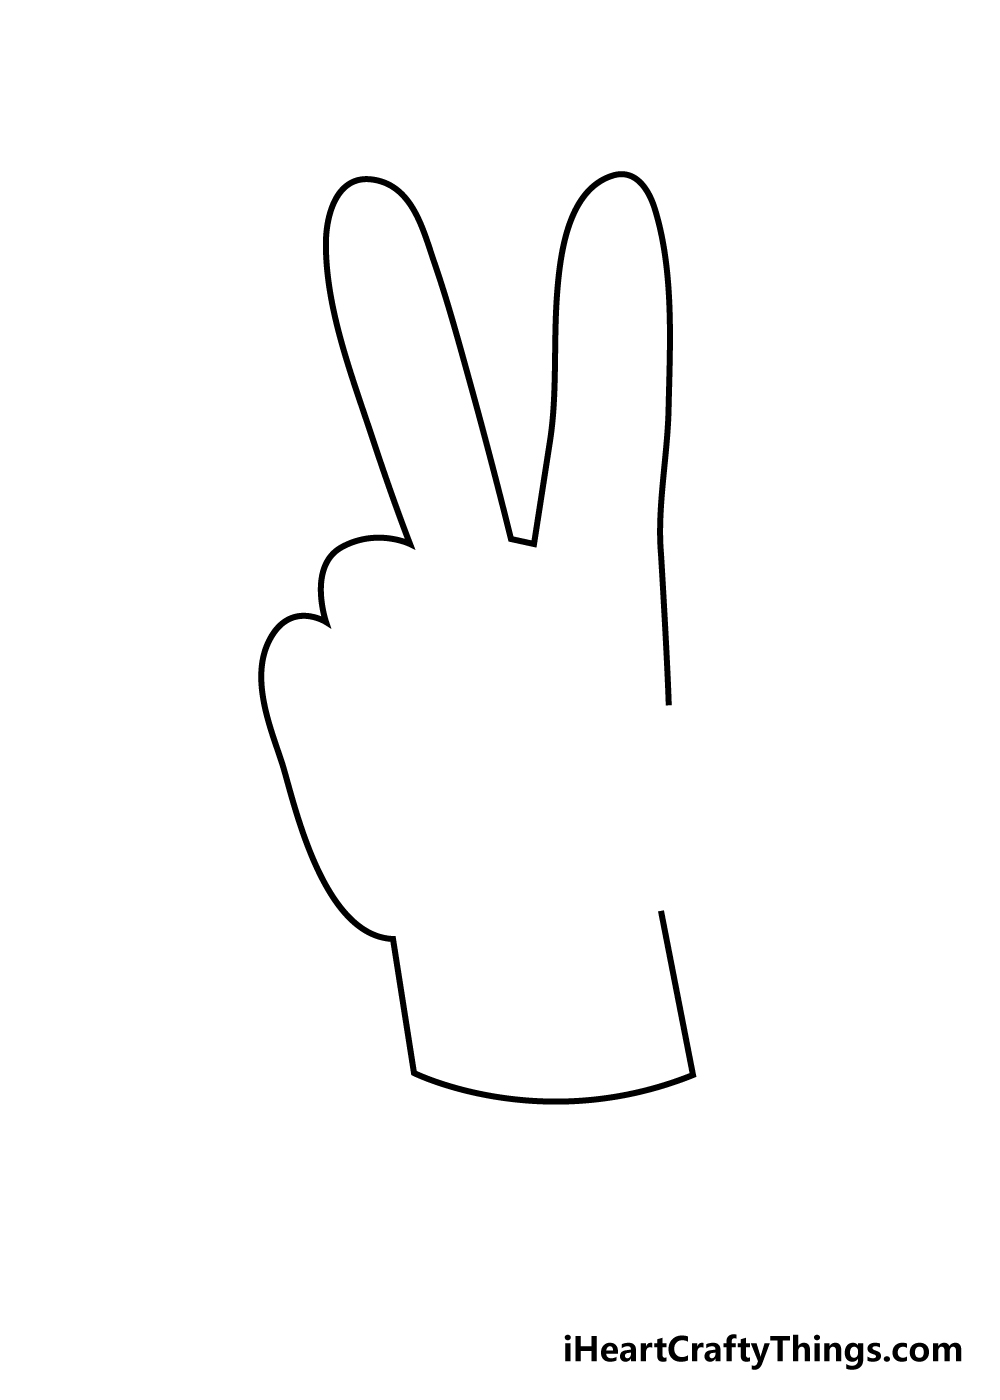 peace sign drawing step 2